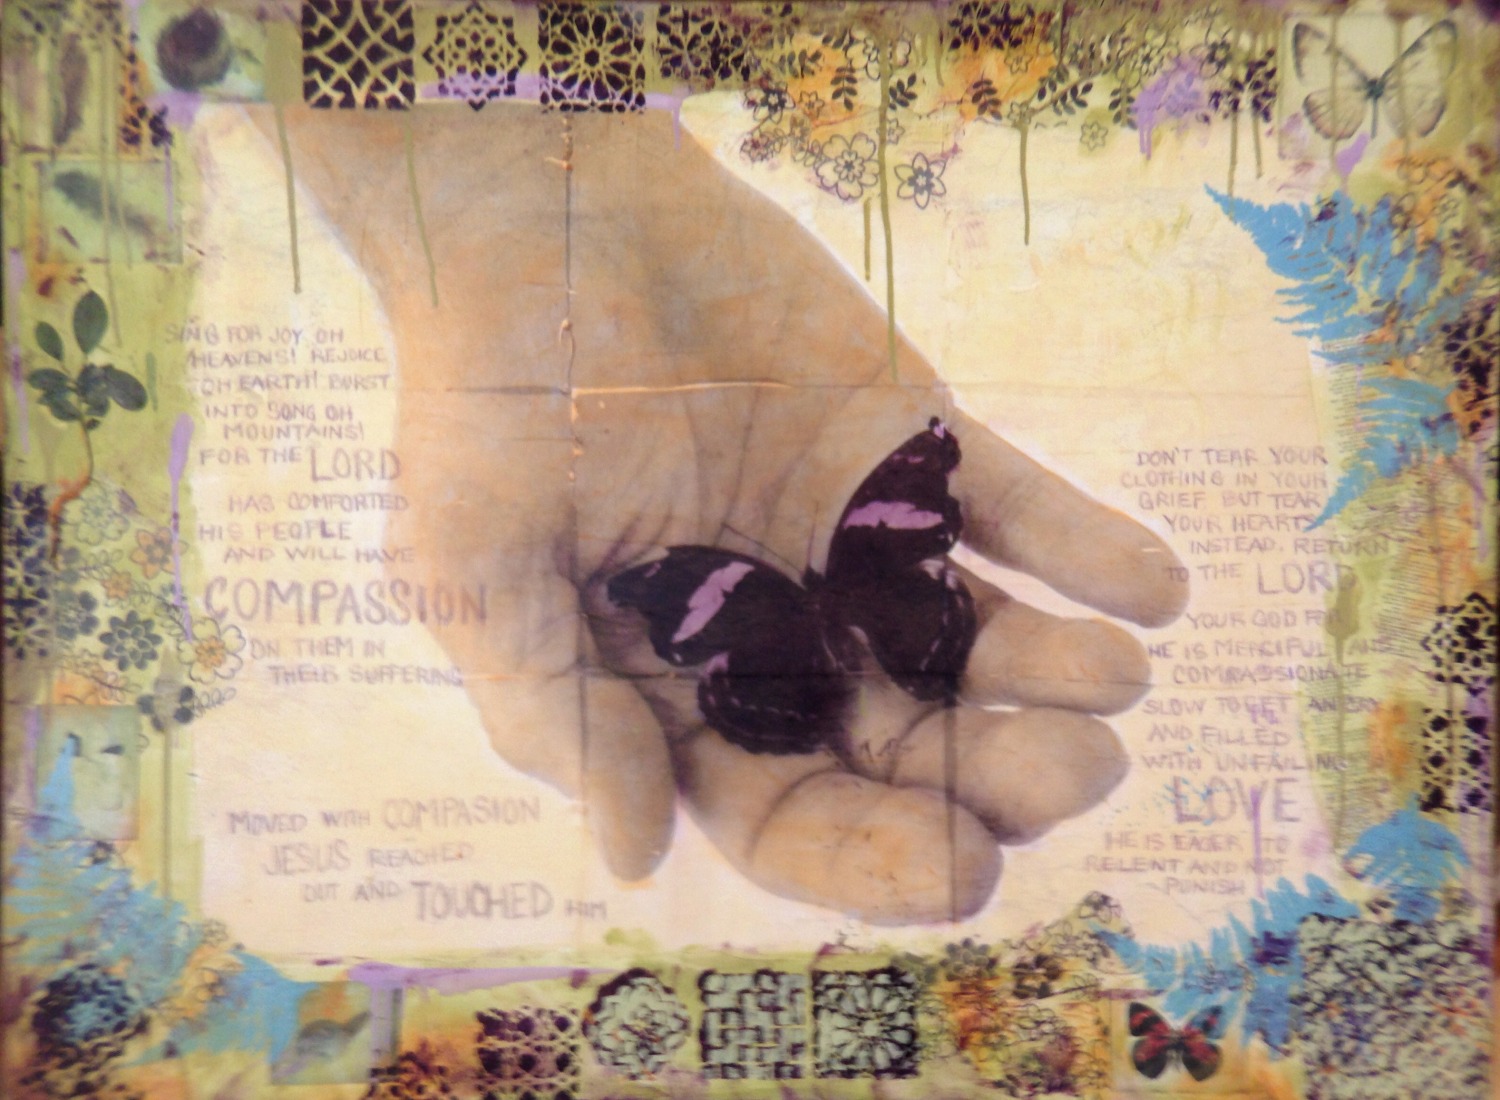 Transformed - photo transfers and mixed media on canvas by Judith Monroe